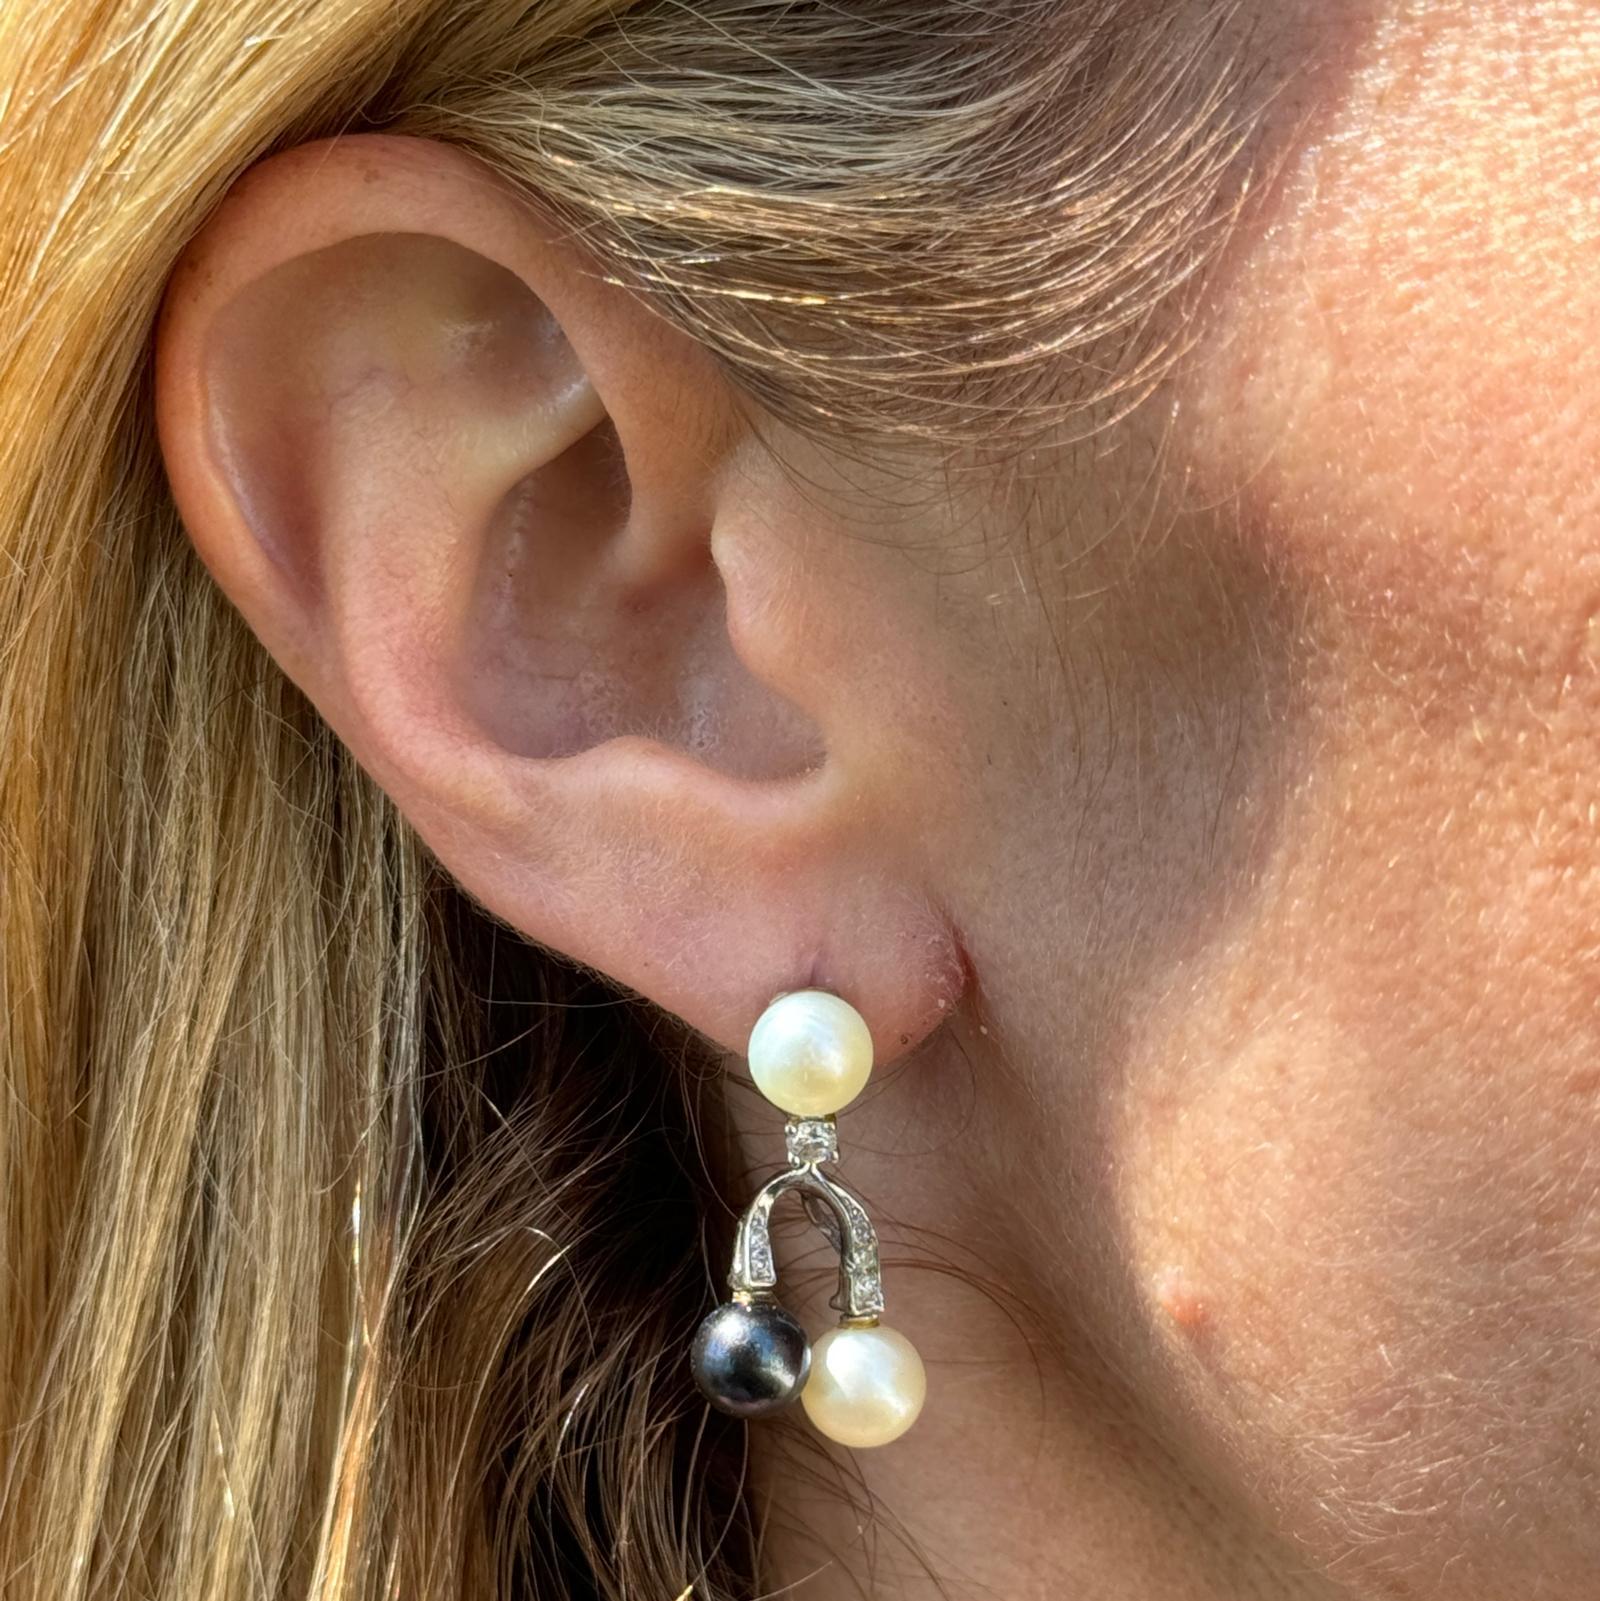 Black and white pearl diamond dangle vintage earrings crafted in 14 karat white gold. The earrings feature 7mm white and black pearls, 2 round brilliant cut diamonds and 10 single cut diamonds weighing approximately .30 carat total weight. The